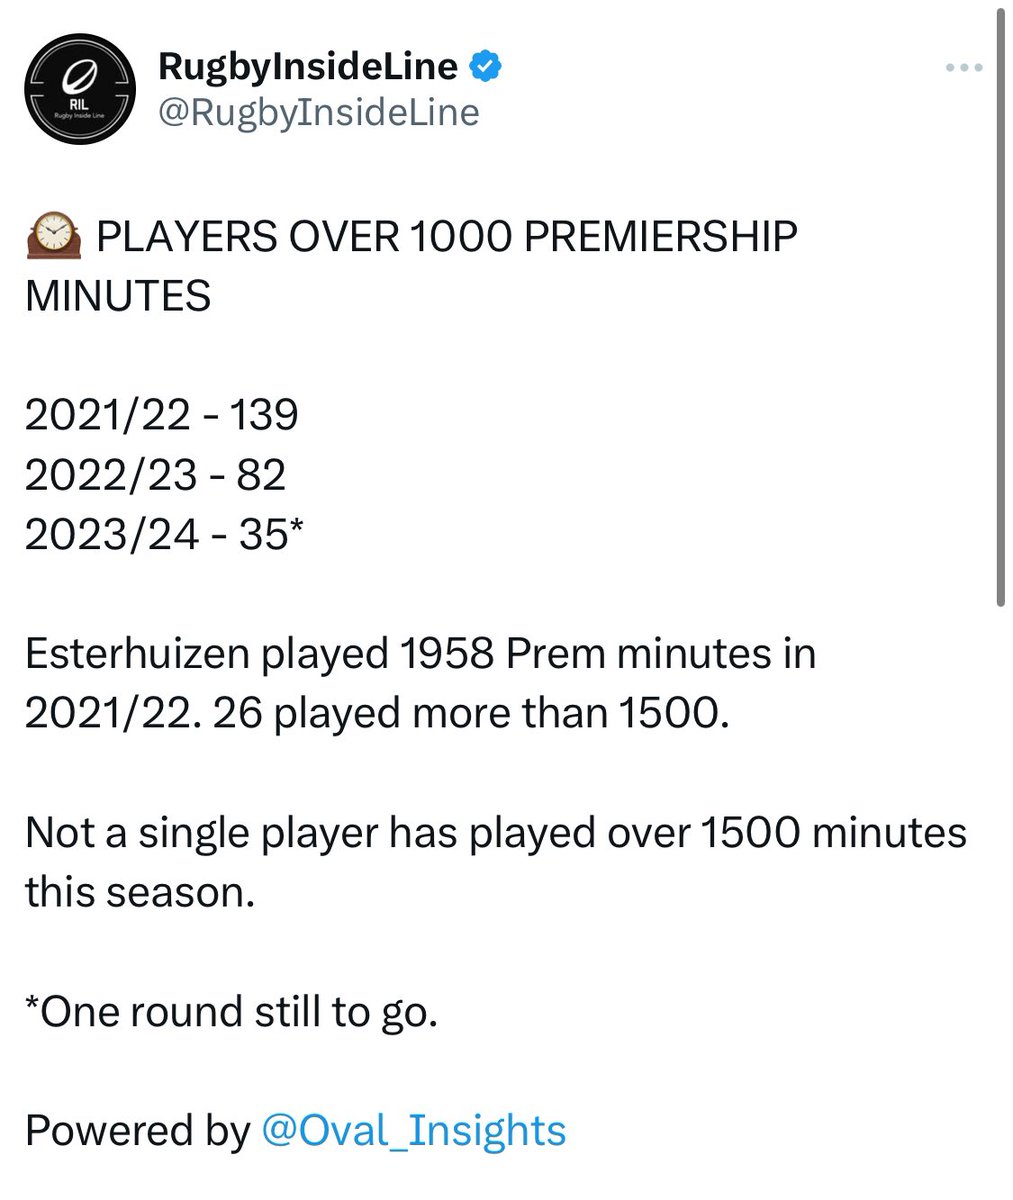 This is a good thing. We must reduce exposure of players to contact to mitigate the risk to their long term brain🧠 health. NFL BiP time is a measly 11 minutes over 17 games = 187 mins. Prem Rugby it’s circa 35 mins and players can rack up 30 full games = 1,000 mins +. Crazy.